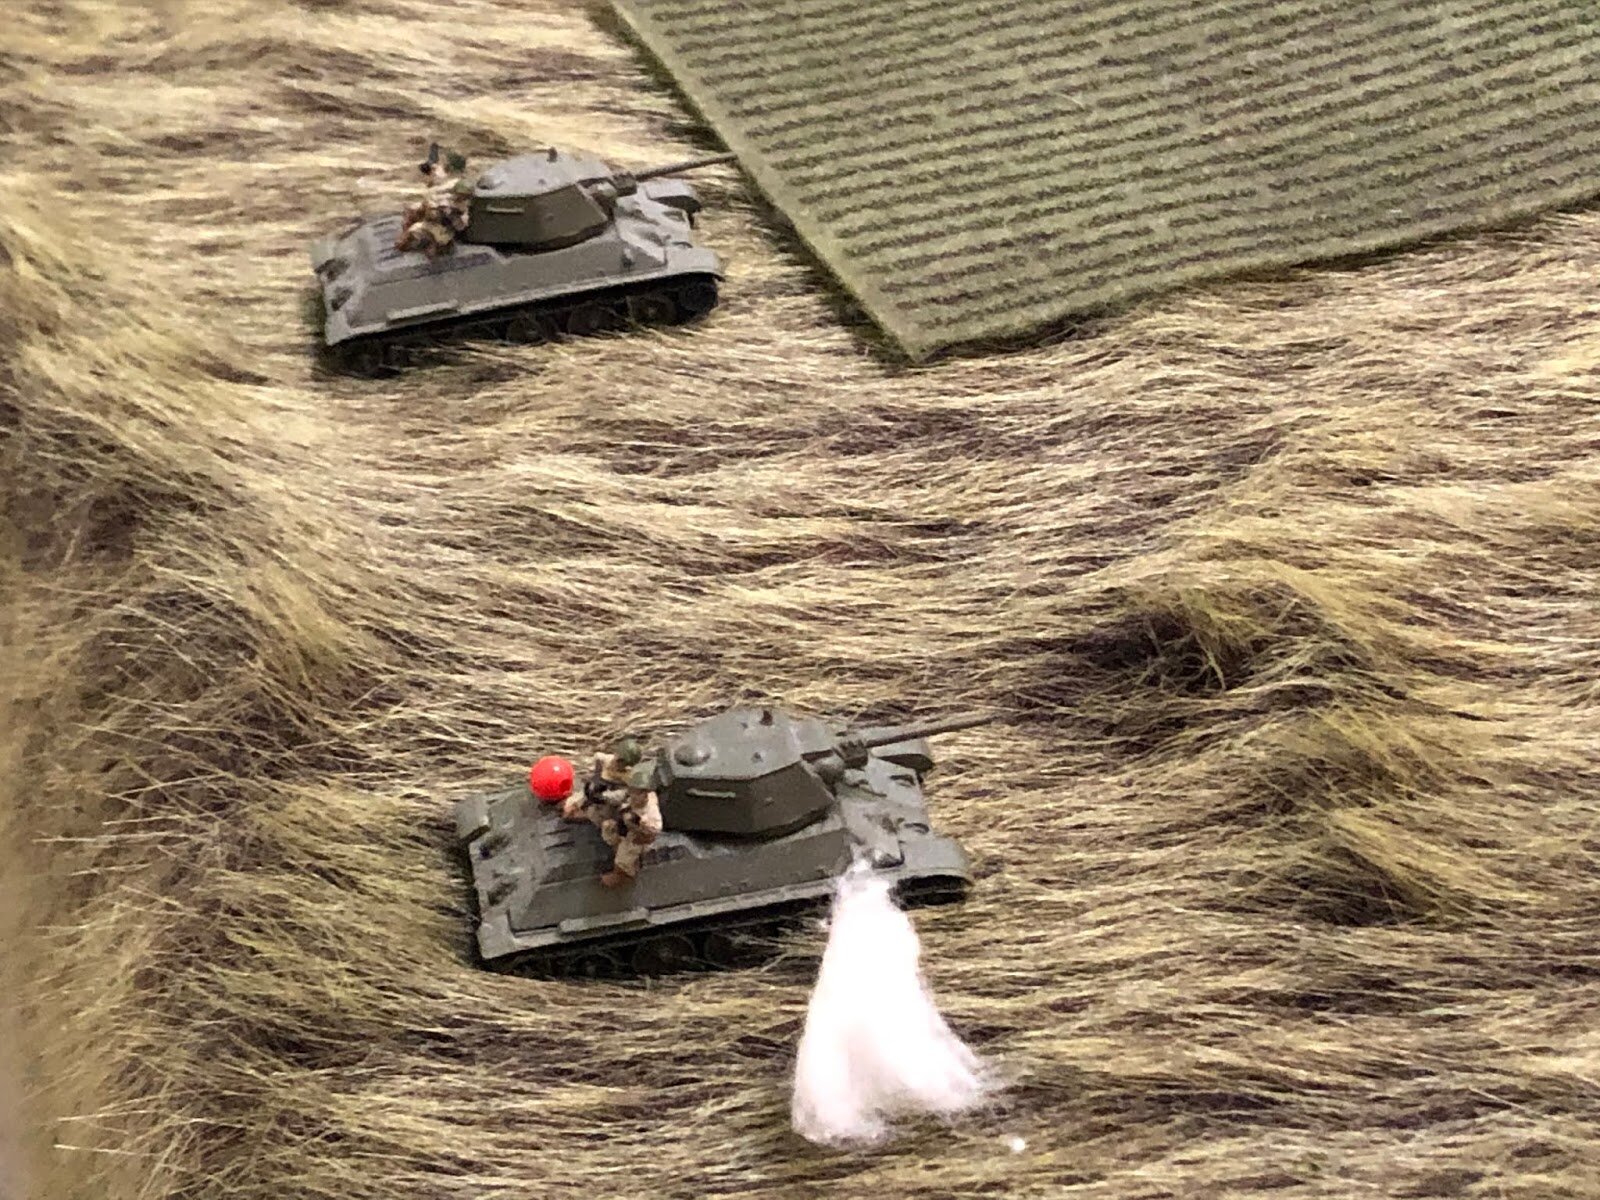  The round misses its target, but suppresses the infantry riding on it!  